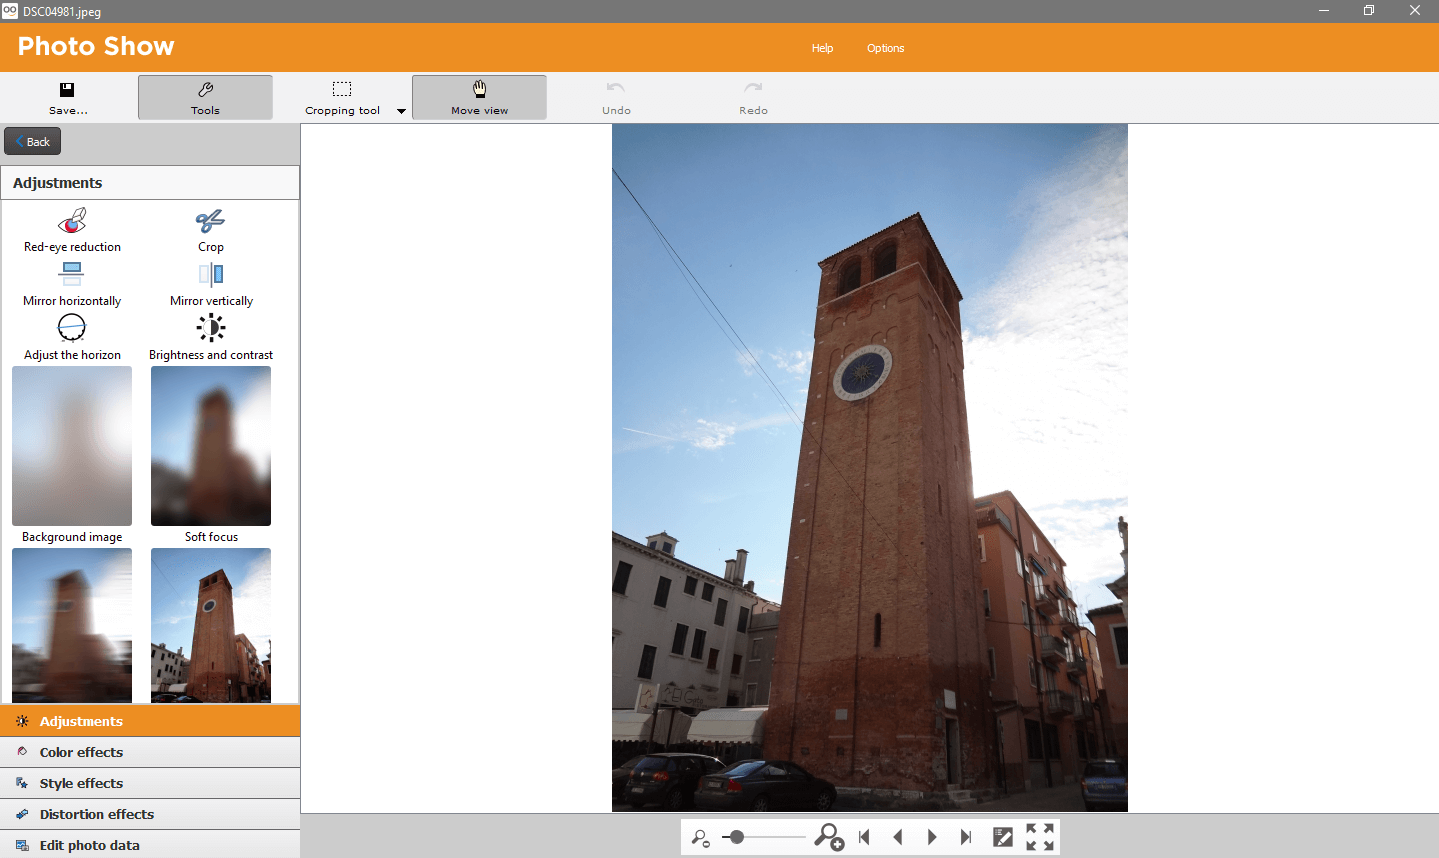 Advanced Photo Enhancement Options in the Software